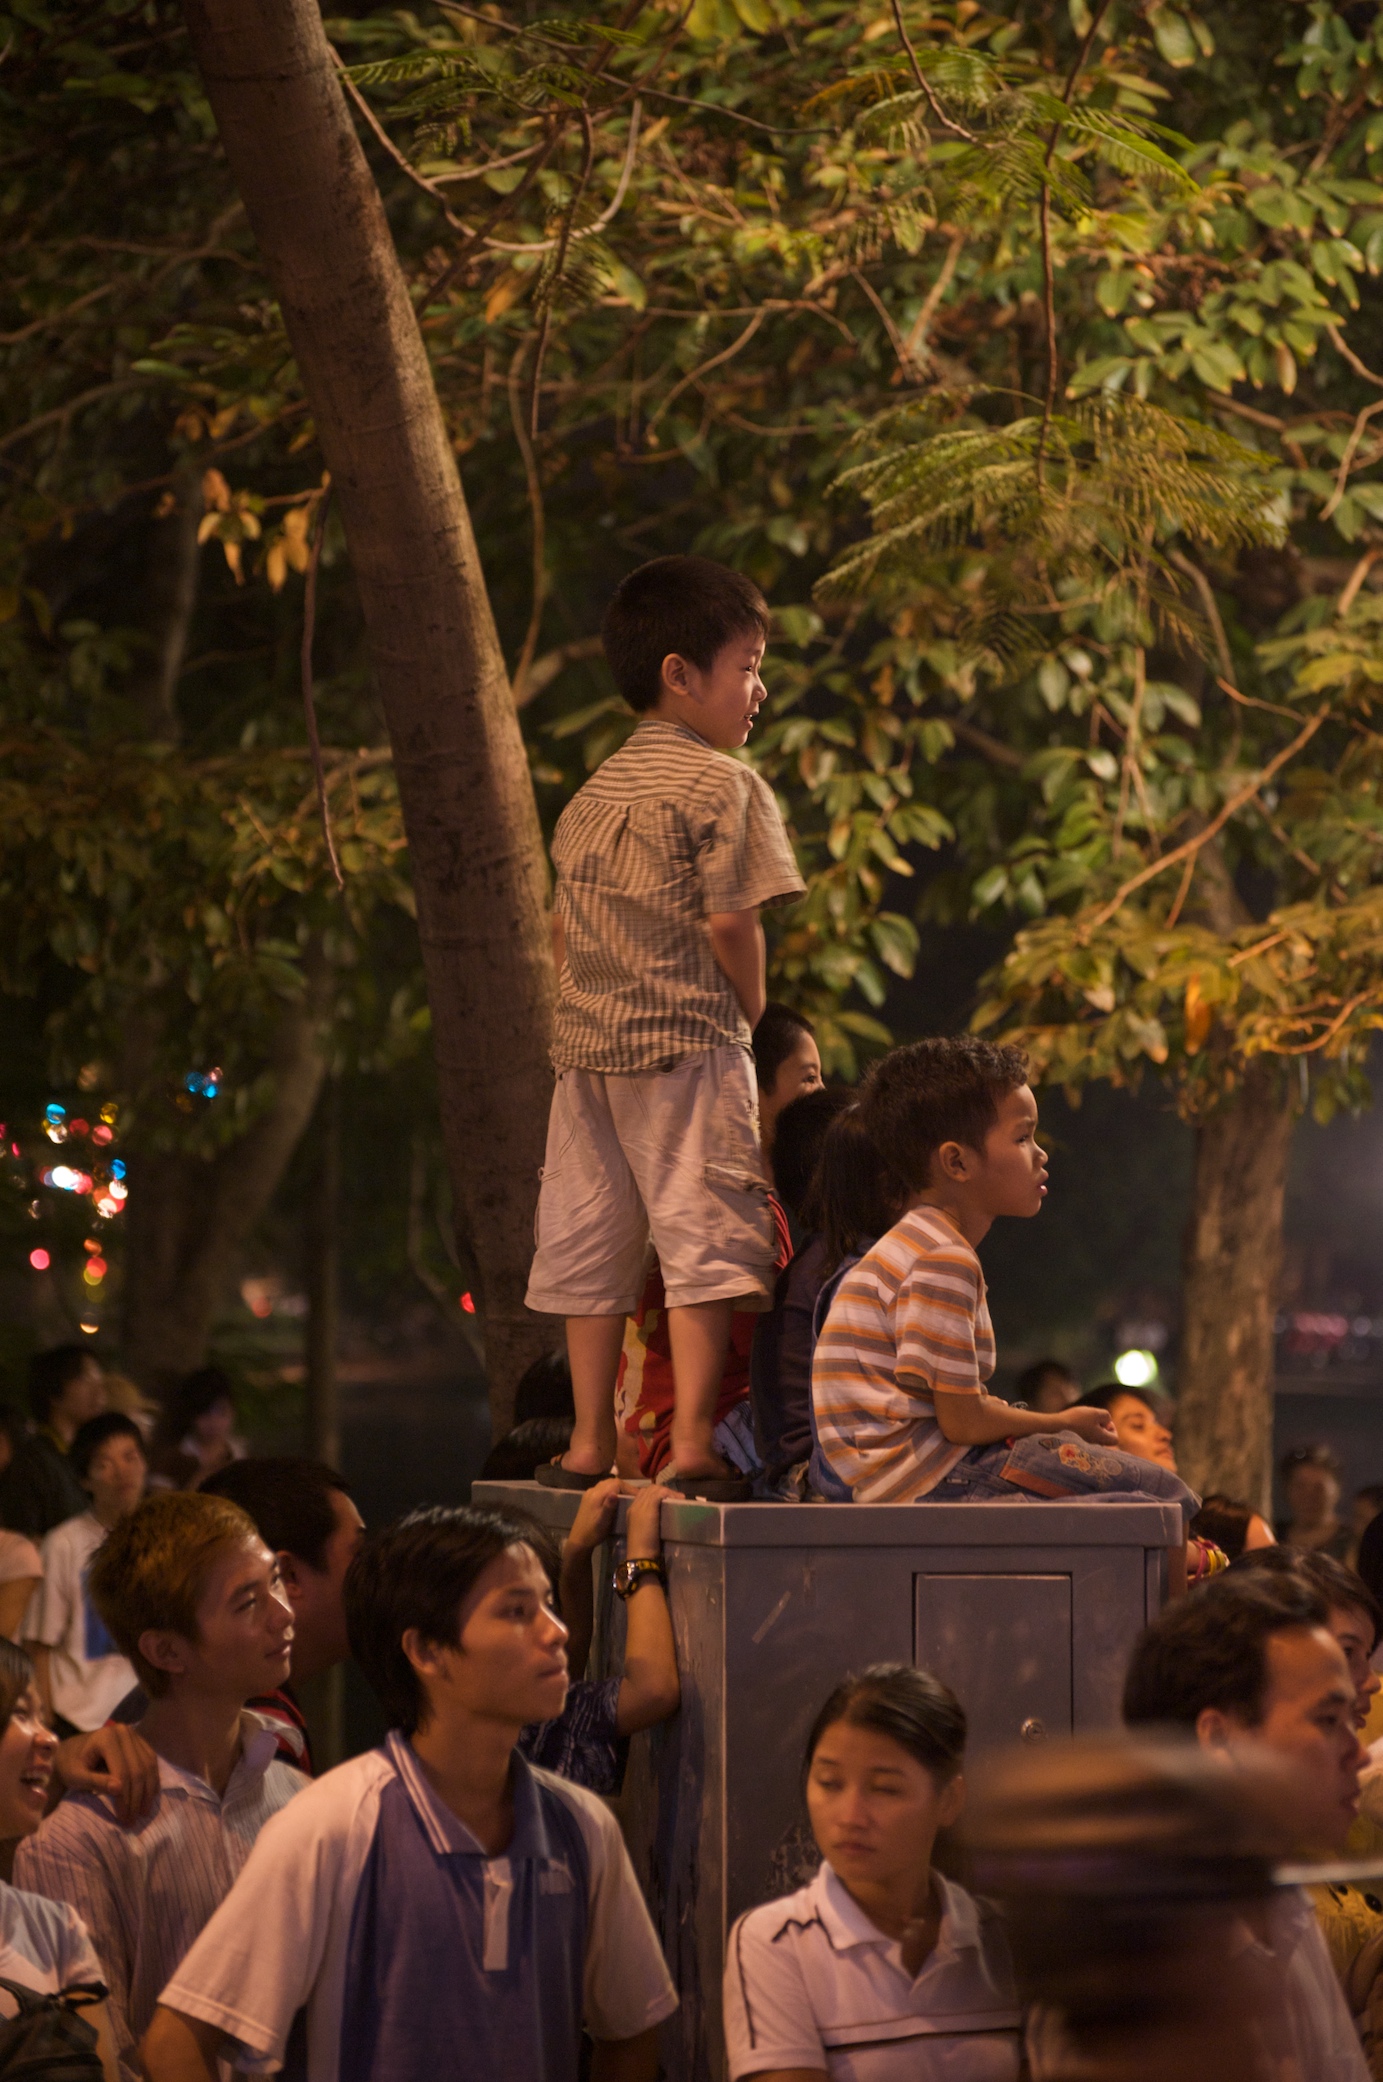 Hanoi's 999th birthday — an attentive audience